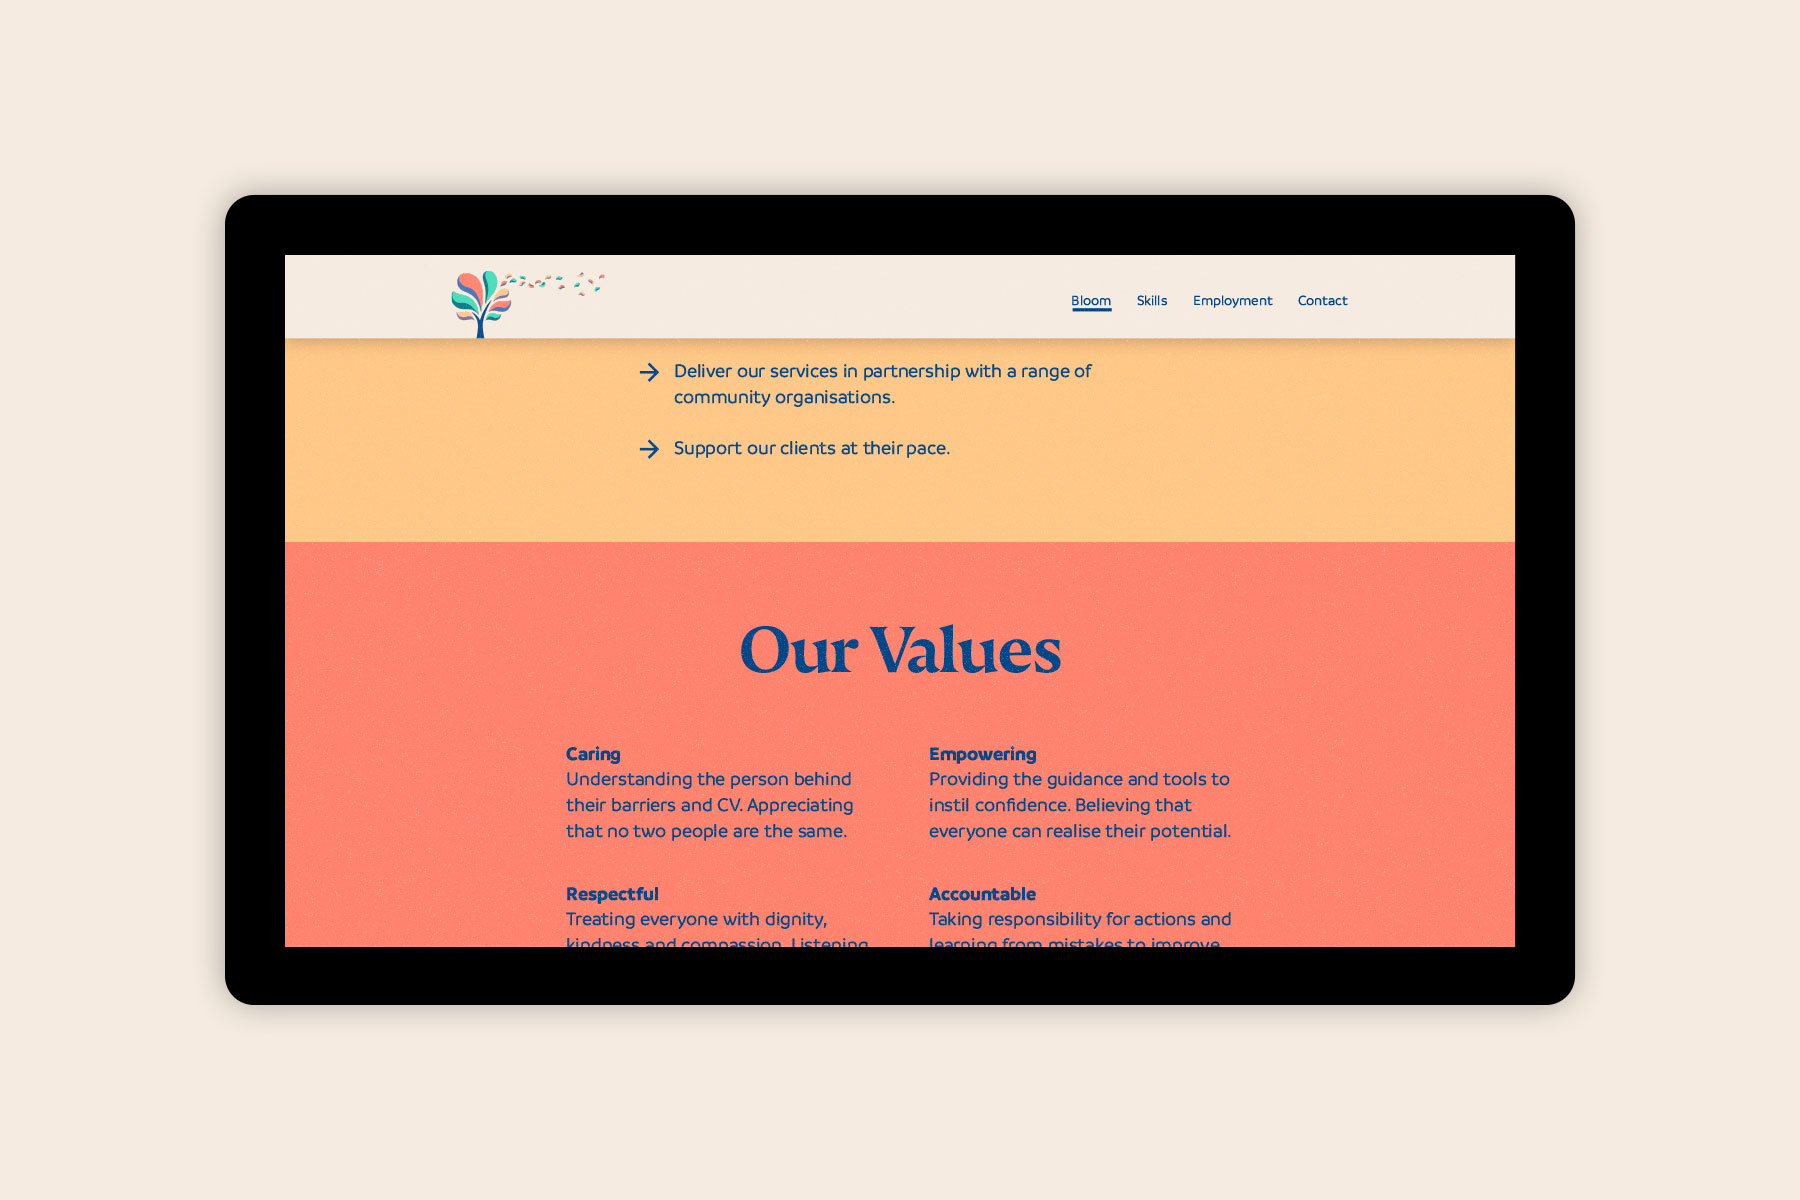 Bloom Skills Employment website home page stating the company's values as caring, empowering, respectful and accountable